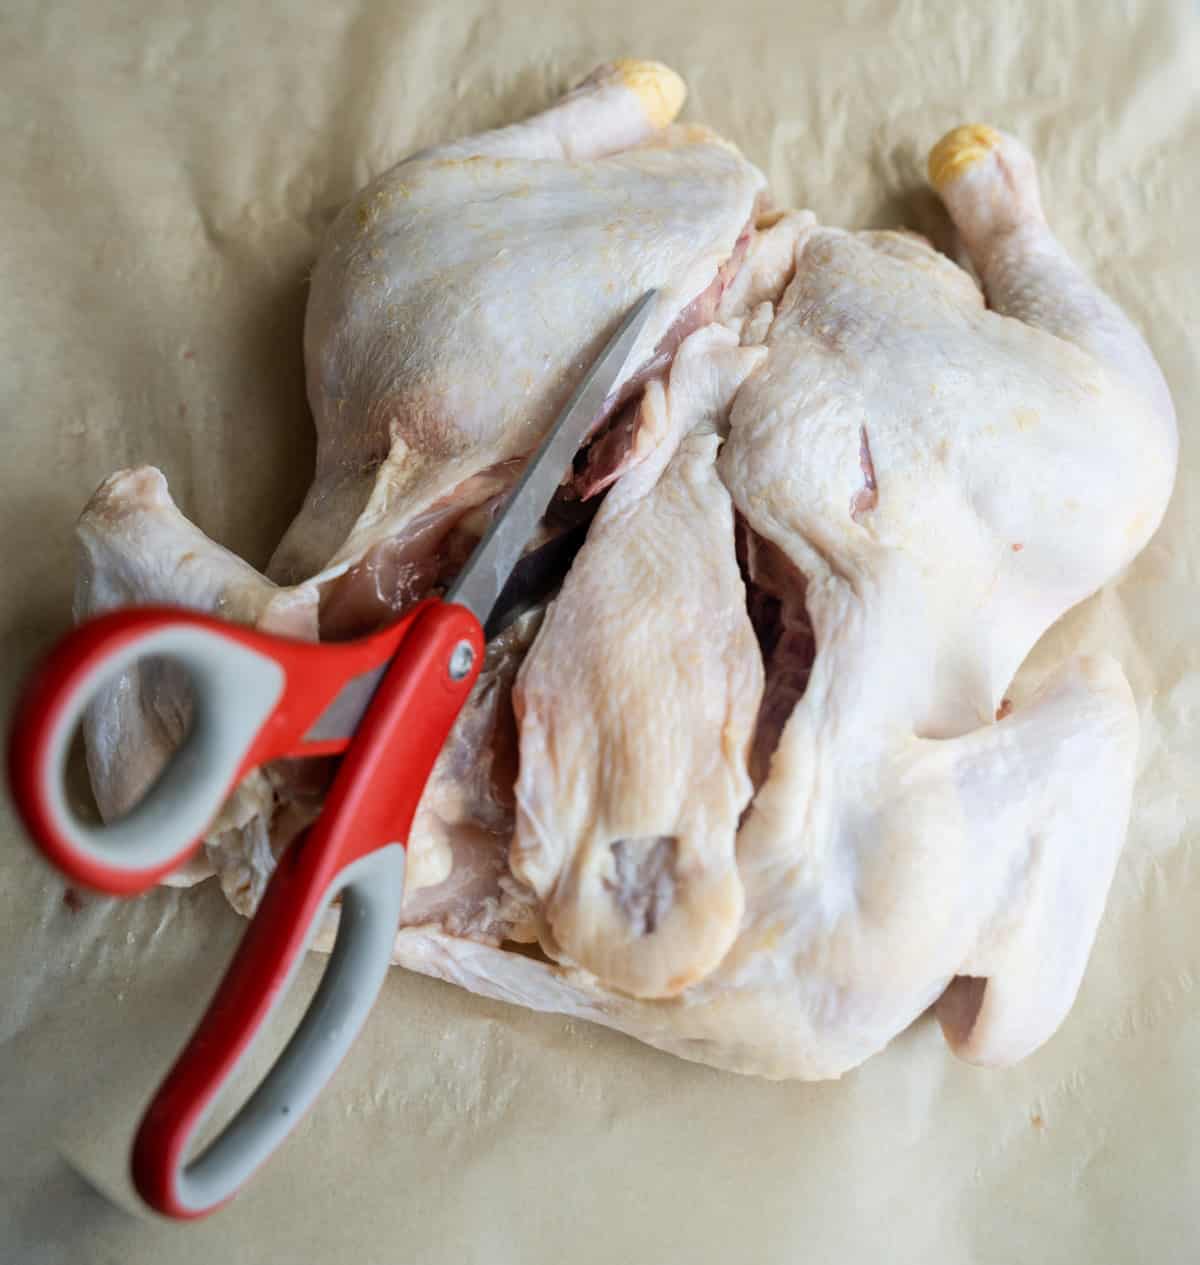 Step2 of the step-by-step spatchcock chicken sunday supper recipe showing Kitchen shears cutting up the side of the backbone of a whole 3 pound chicken